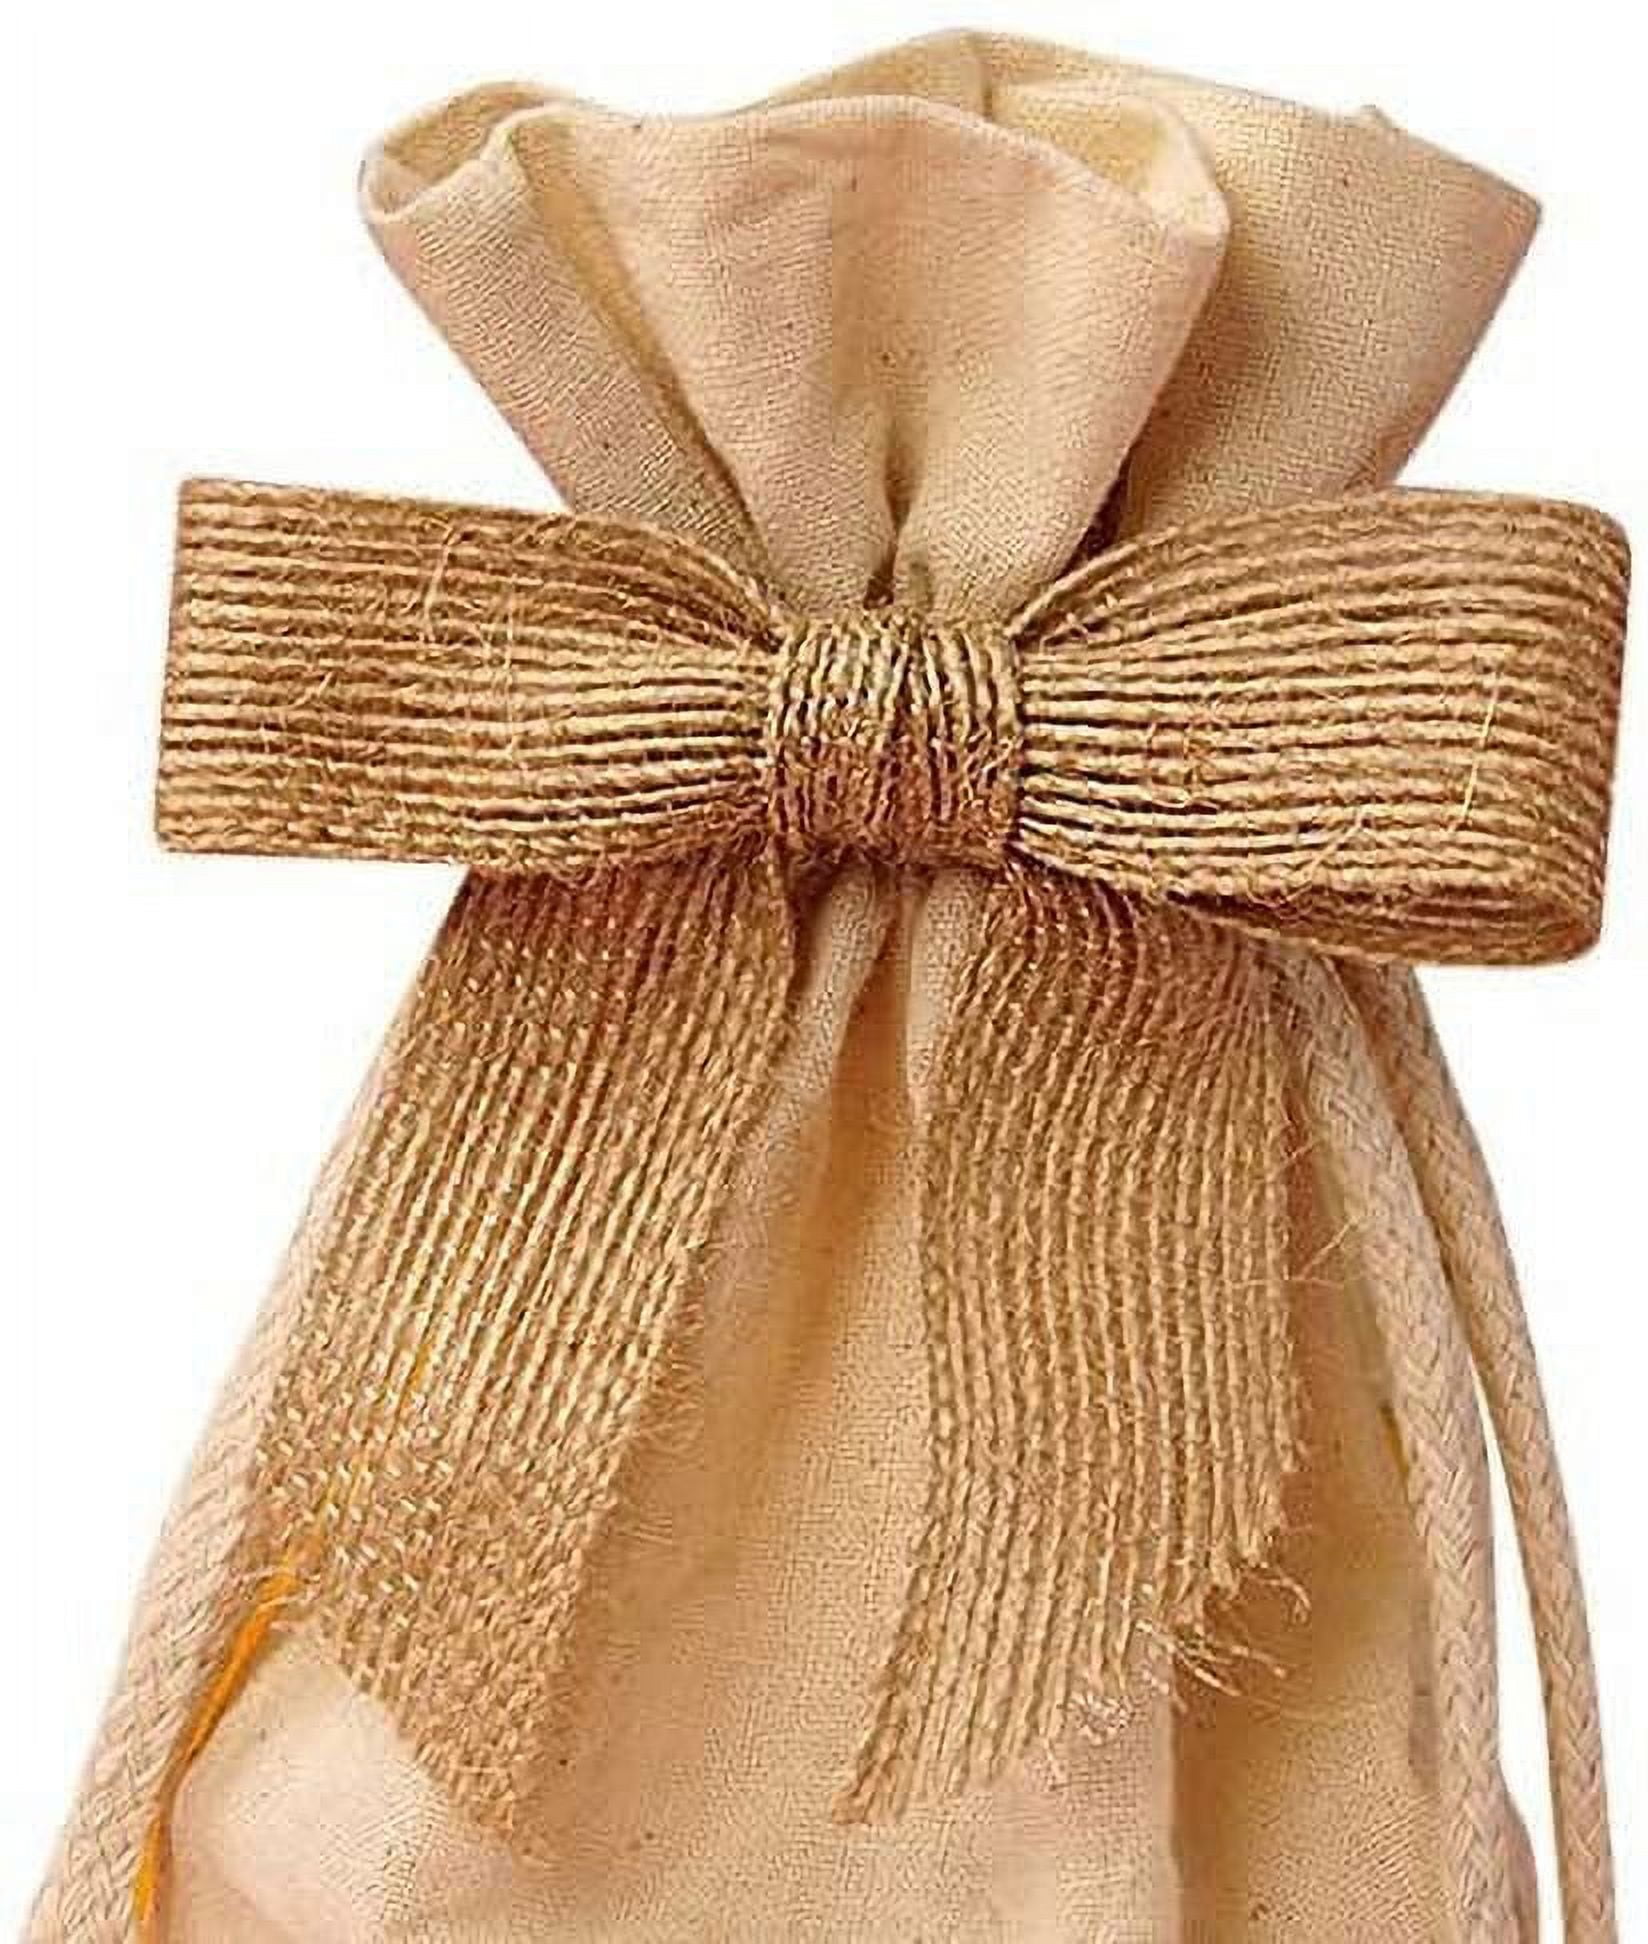 50 Pre-tied Jute Twine Double Bows, Yellow Bows for Gift Wrapping / Wedding  Cake Bags / Candy Buffet Bags, Cards Decor, Rustic Bows 